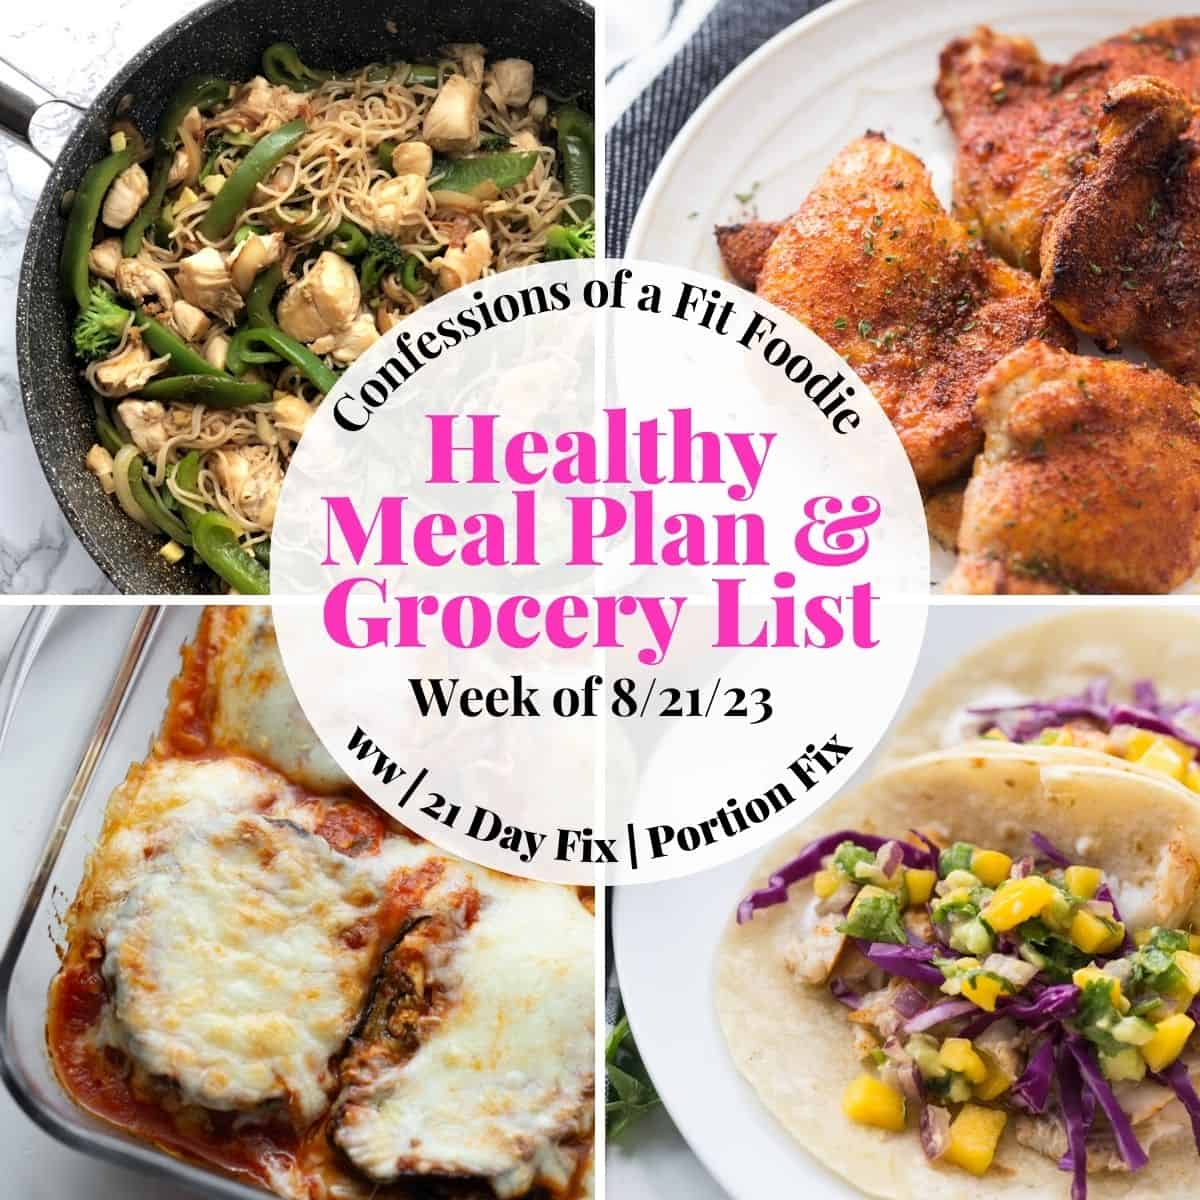 Food photo collage with pink and black text on a white circle. Text says, "Healthy Meal Plan & Grocery List Week of 8/21/23"